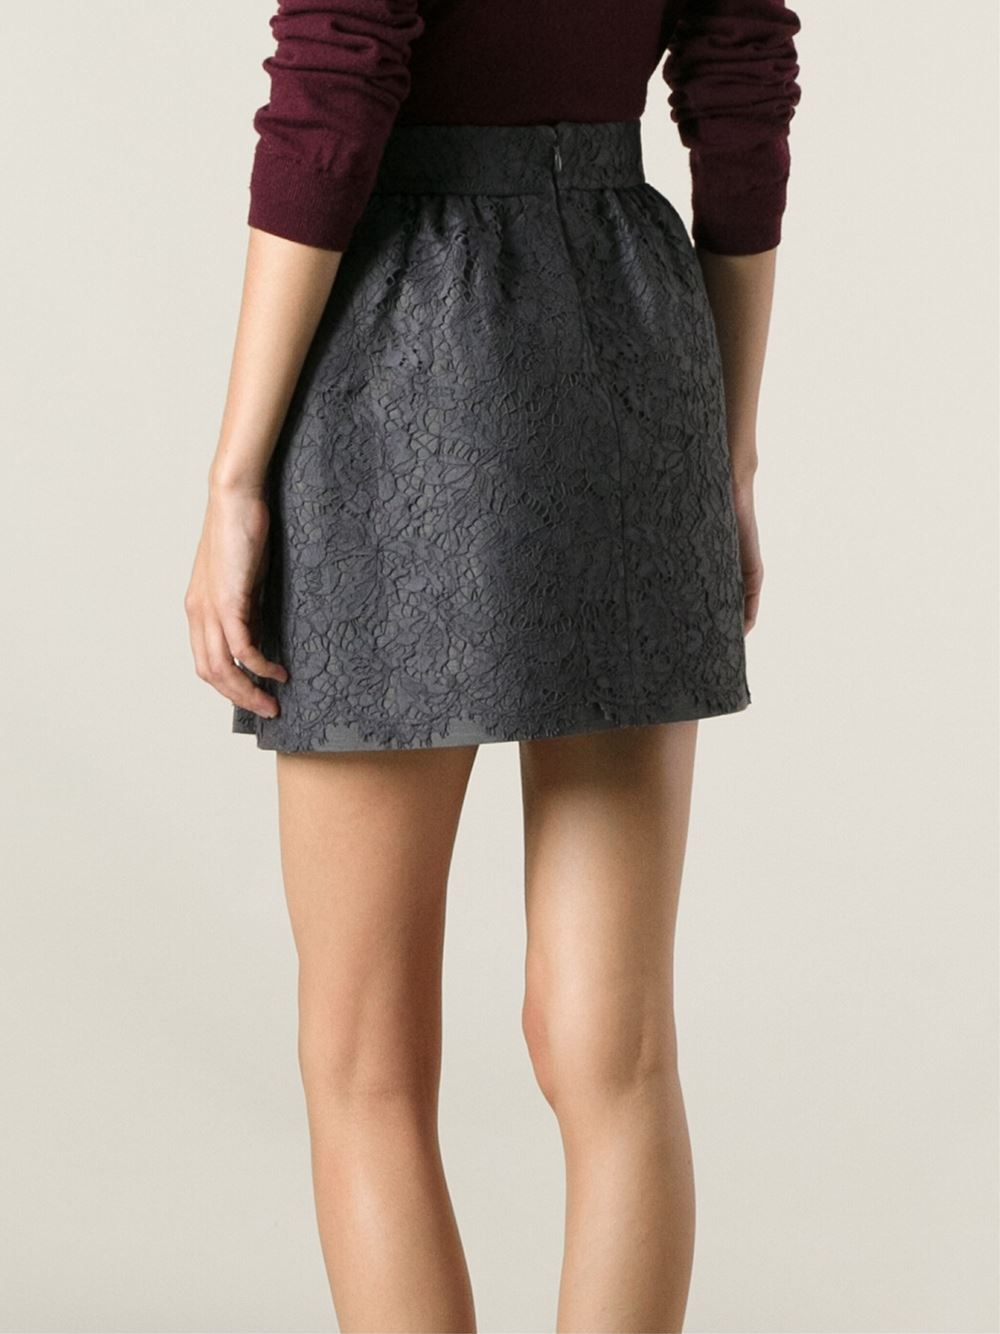 Lyst - Valentino Floral Lace Skirt in Gray